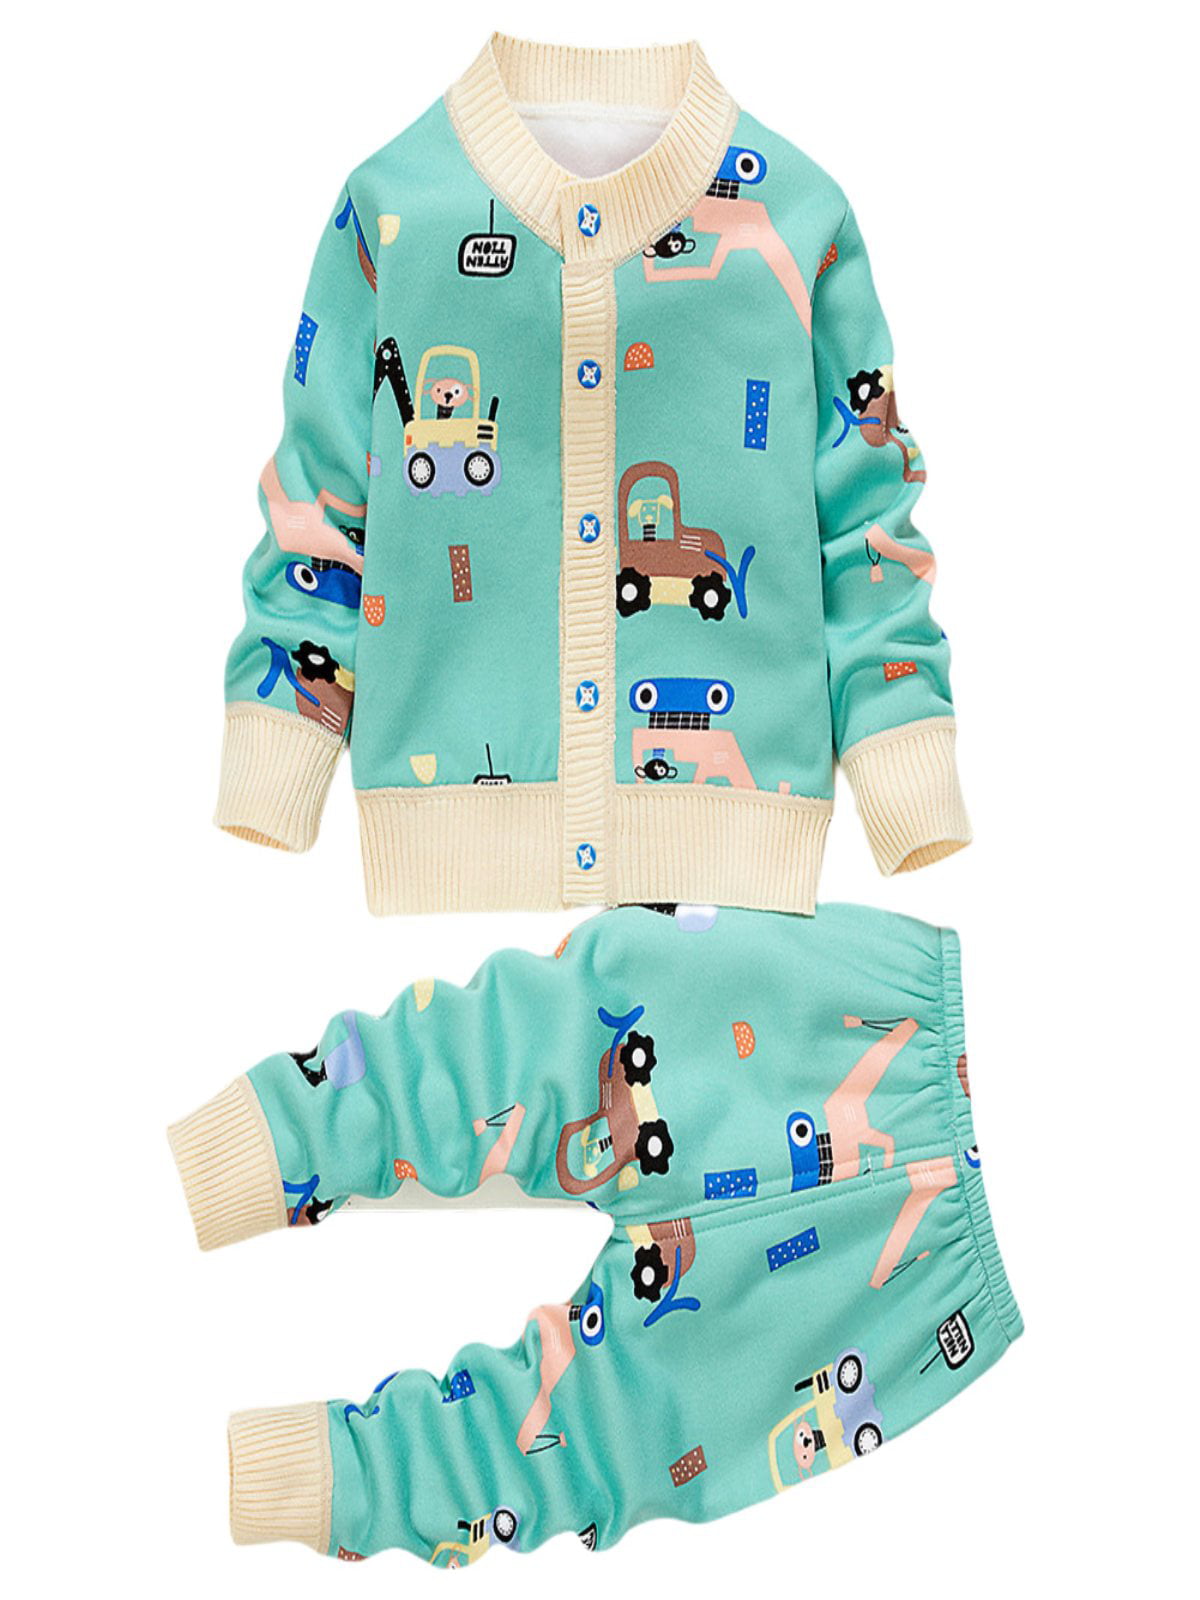 Details about   2PC Toddler Kids Baby Boy Autumn Outfits Clothes Coat Tops+Pants Tracksuits Sets 